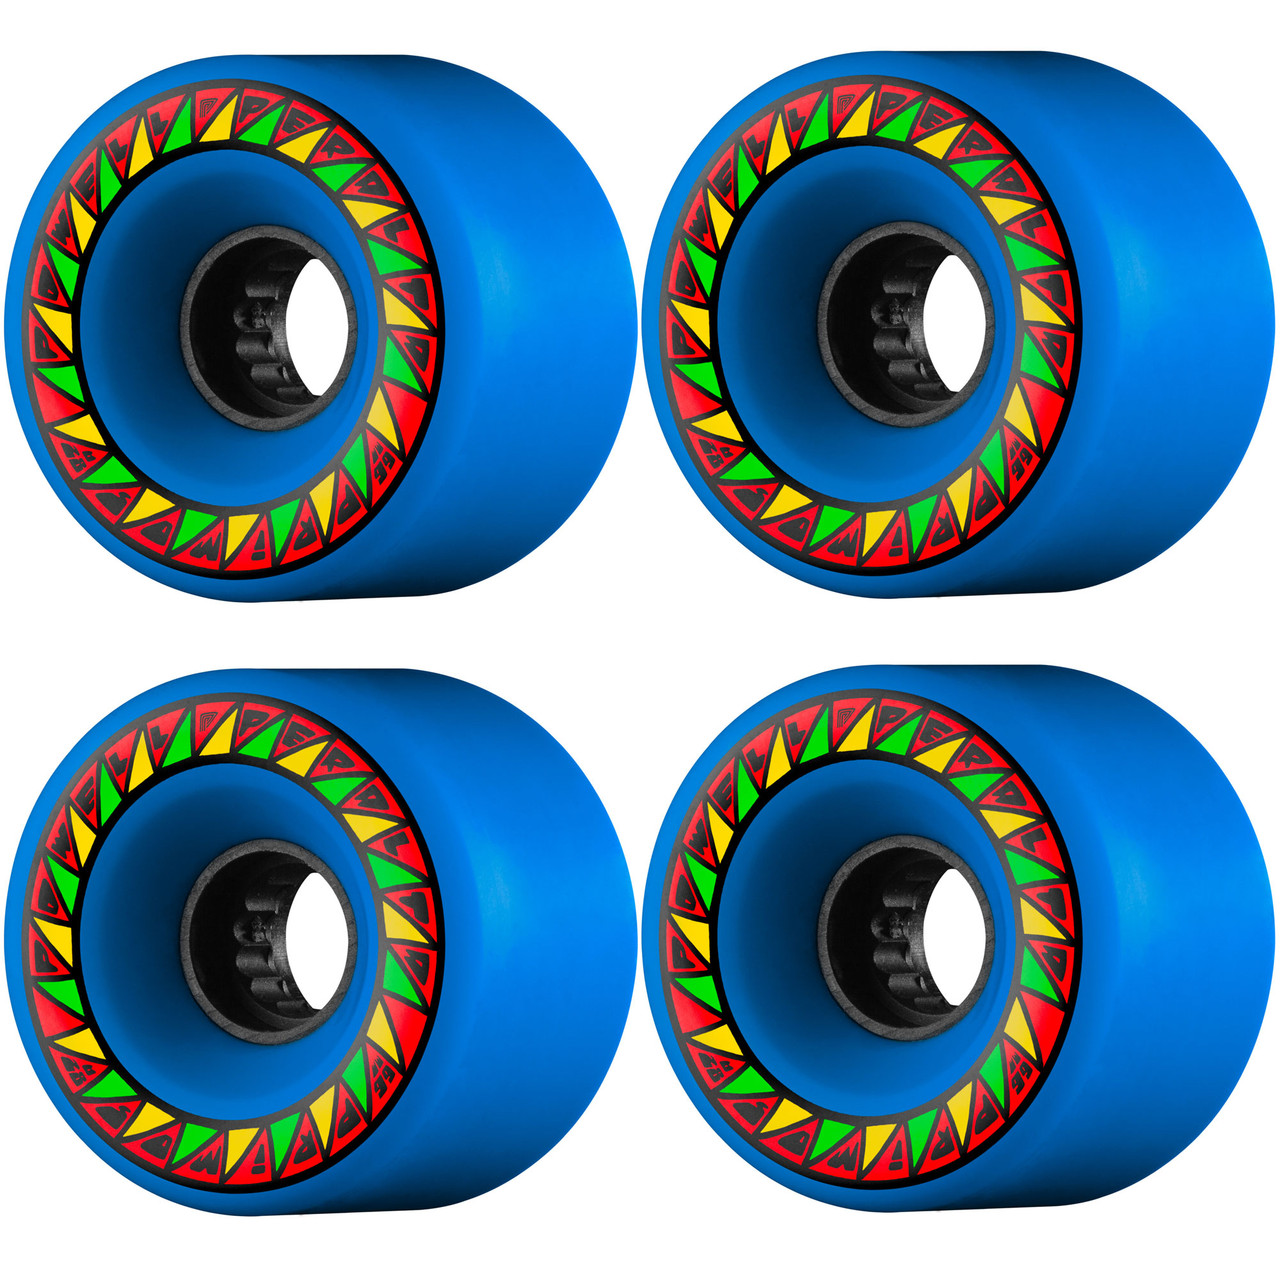 POWELL PERALTA Wheels 66mm Primo 82A SSF blue